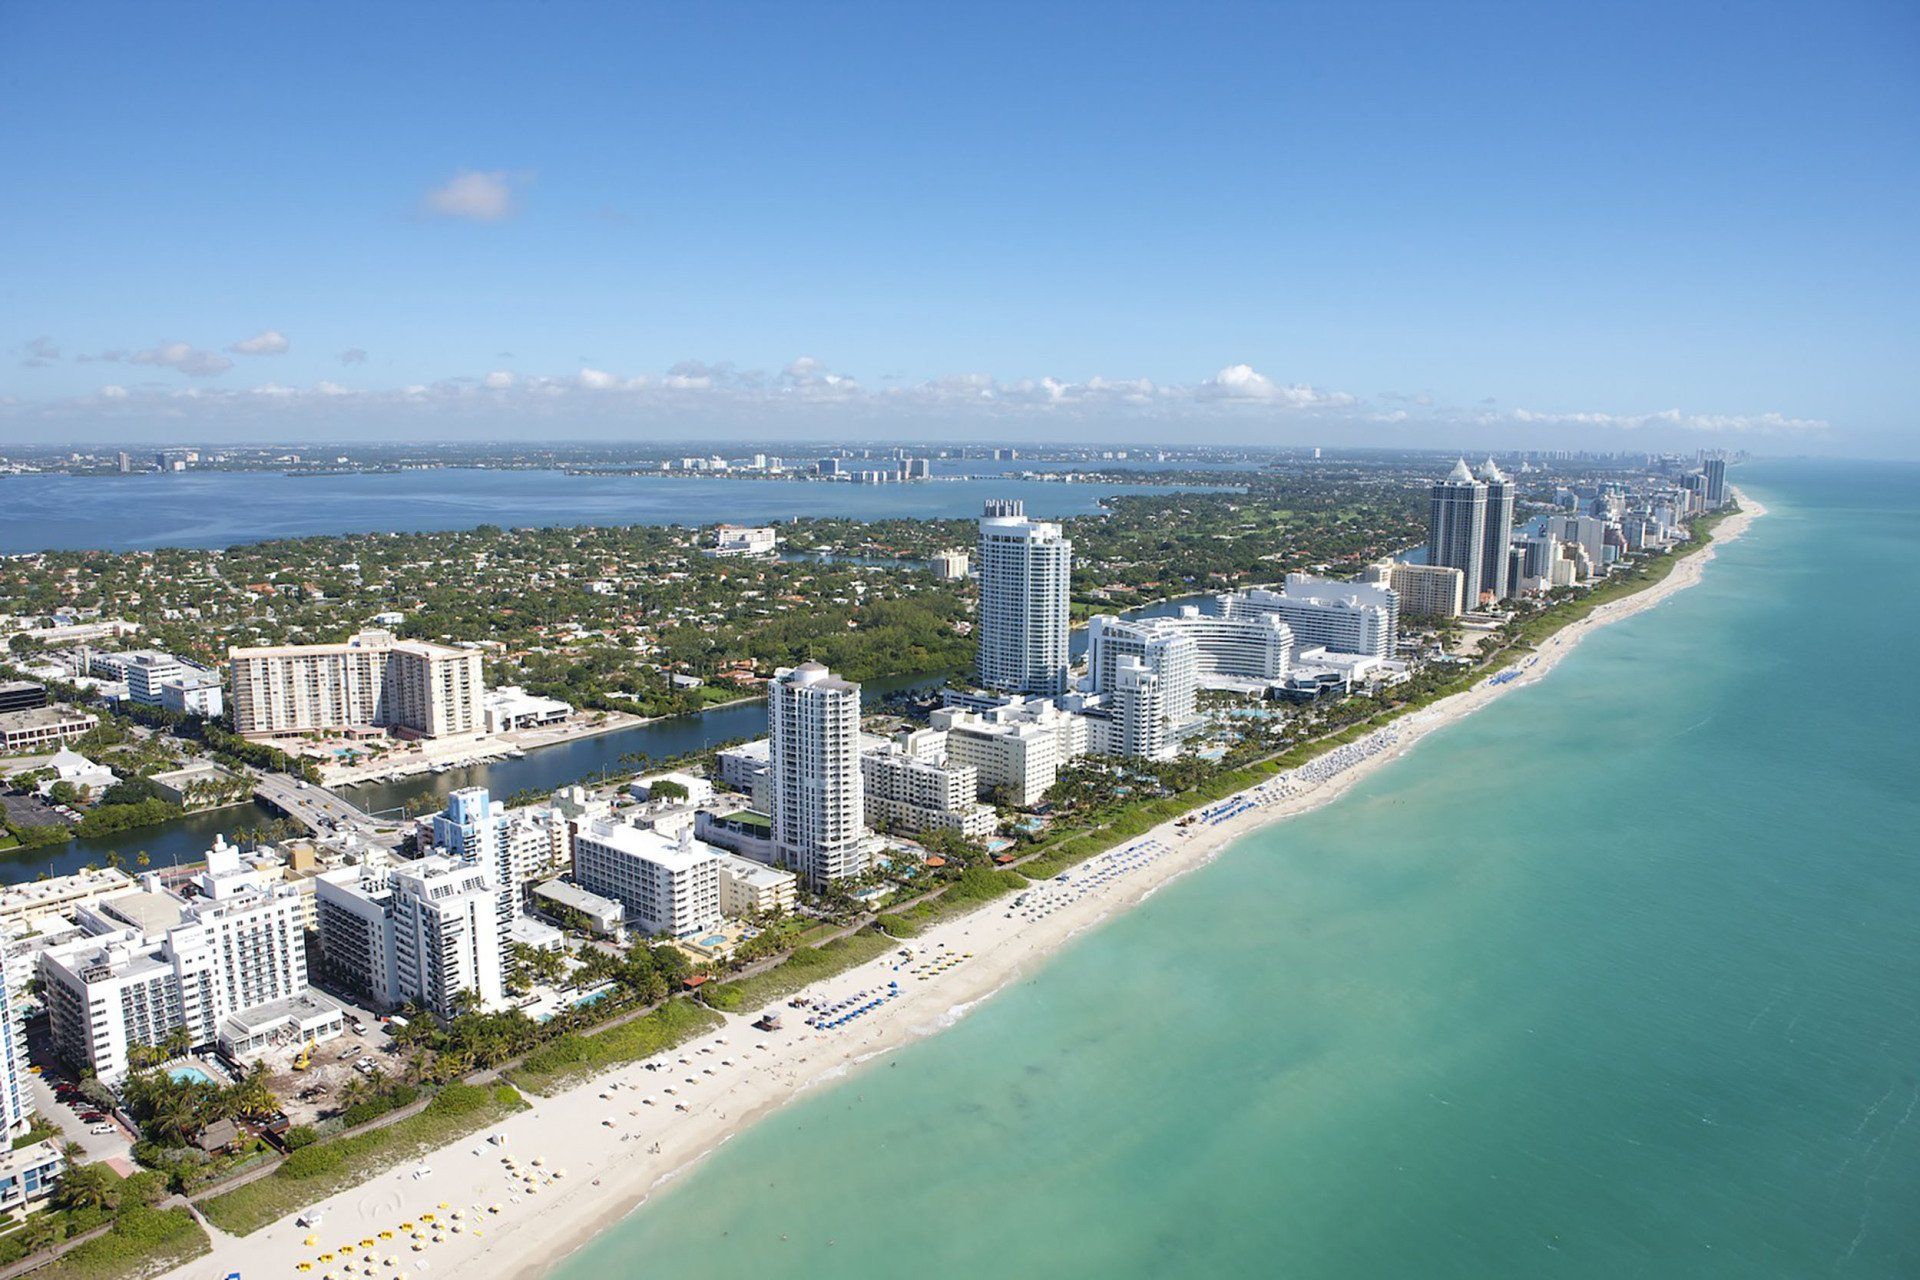 An aerial view of a city and a beach in miami florida.